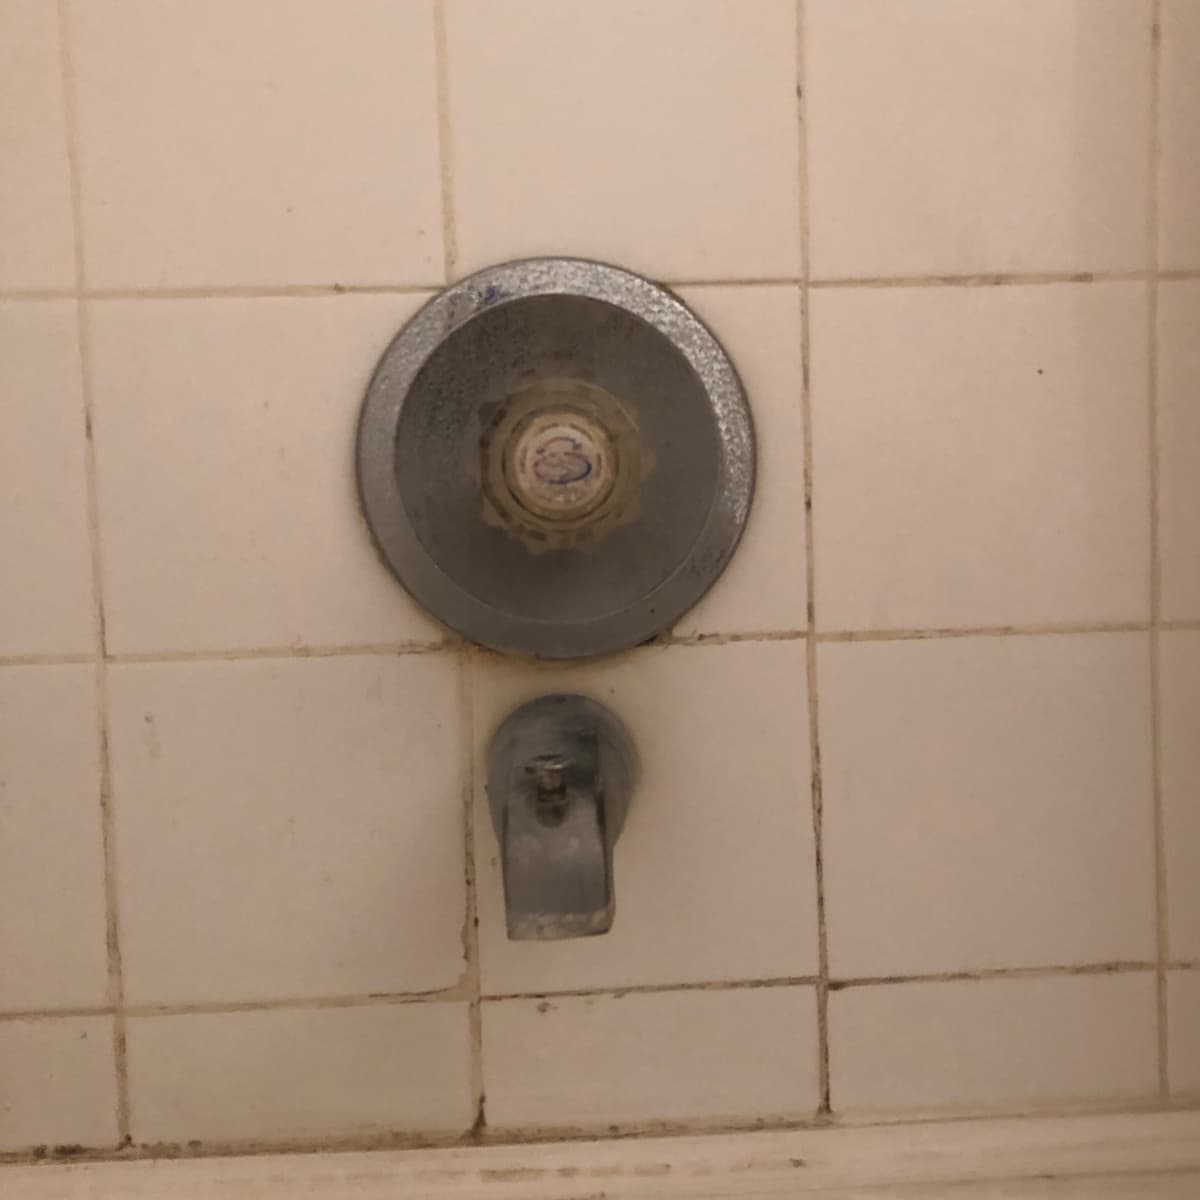 Replace A Single Handle Shower Valve, How To Replace Single Handle Bathtub Faucet